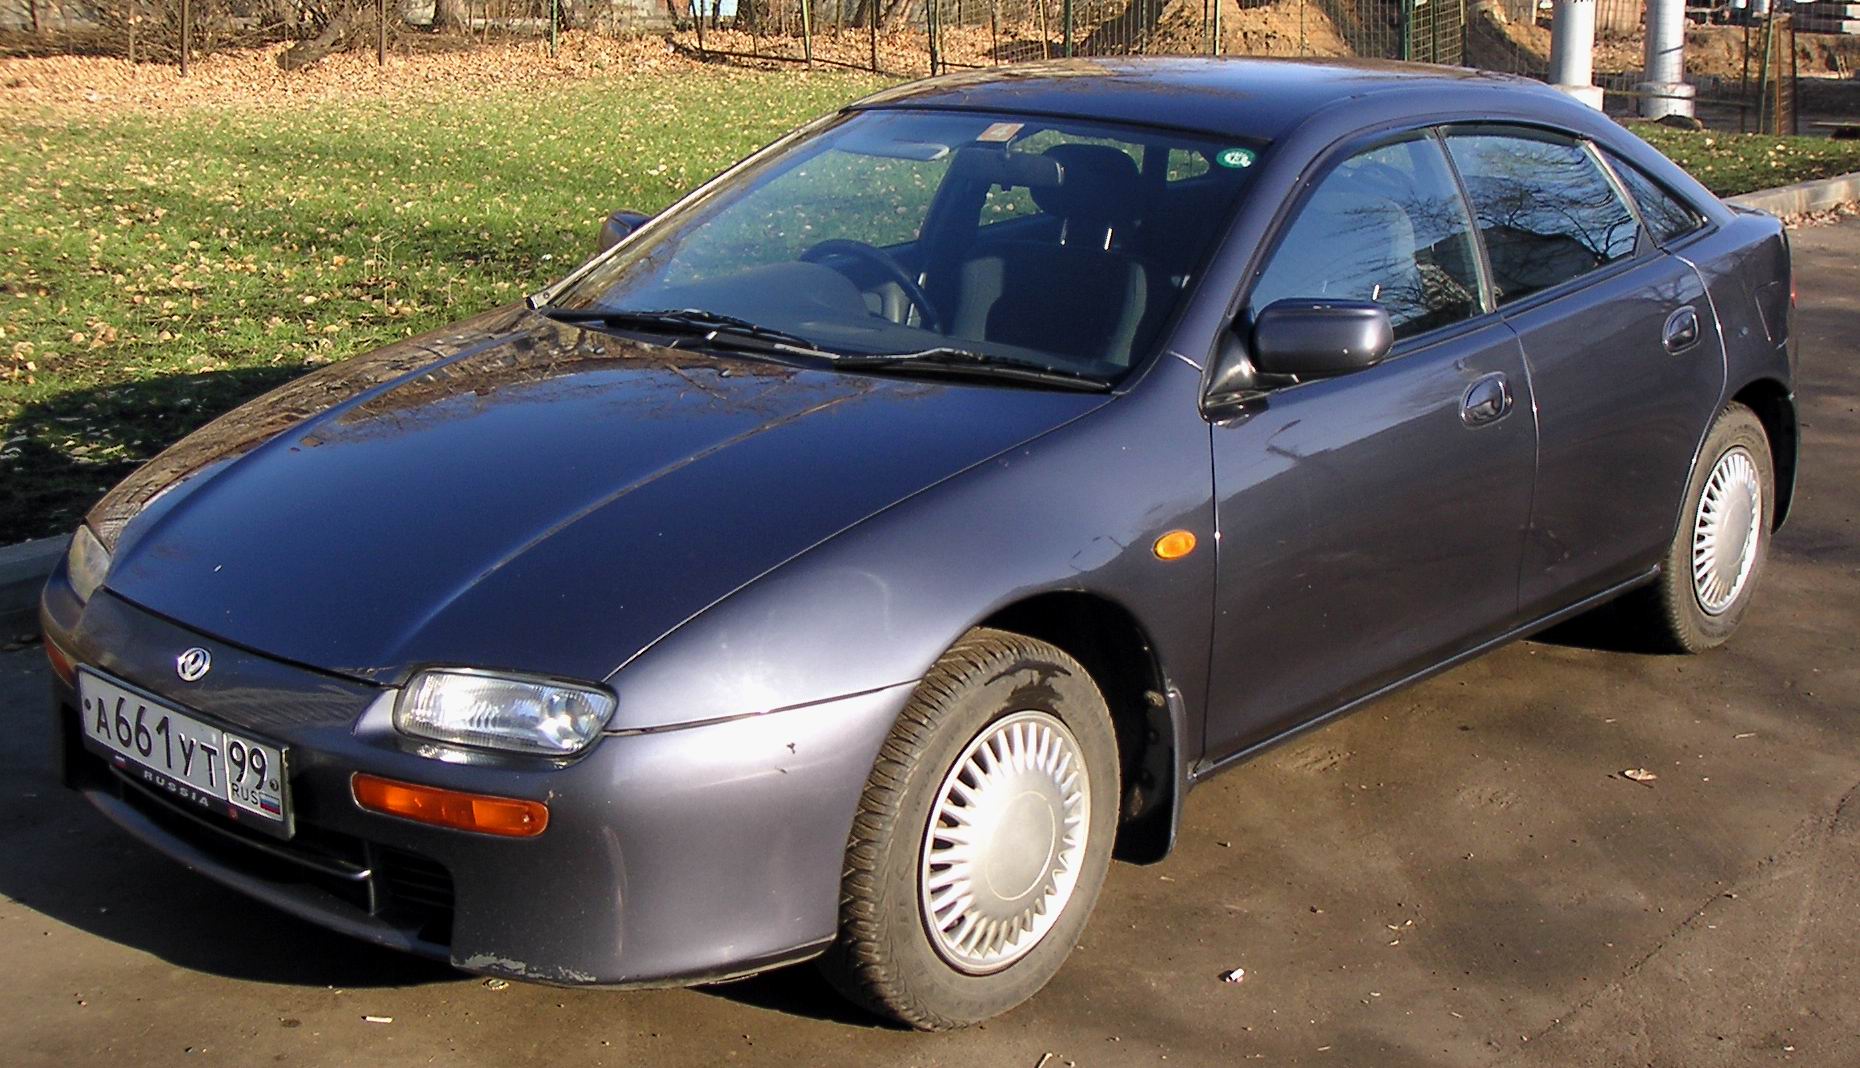 Mazda Allegro 1996 Review, Amazing Pictures and Images